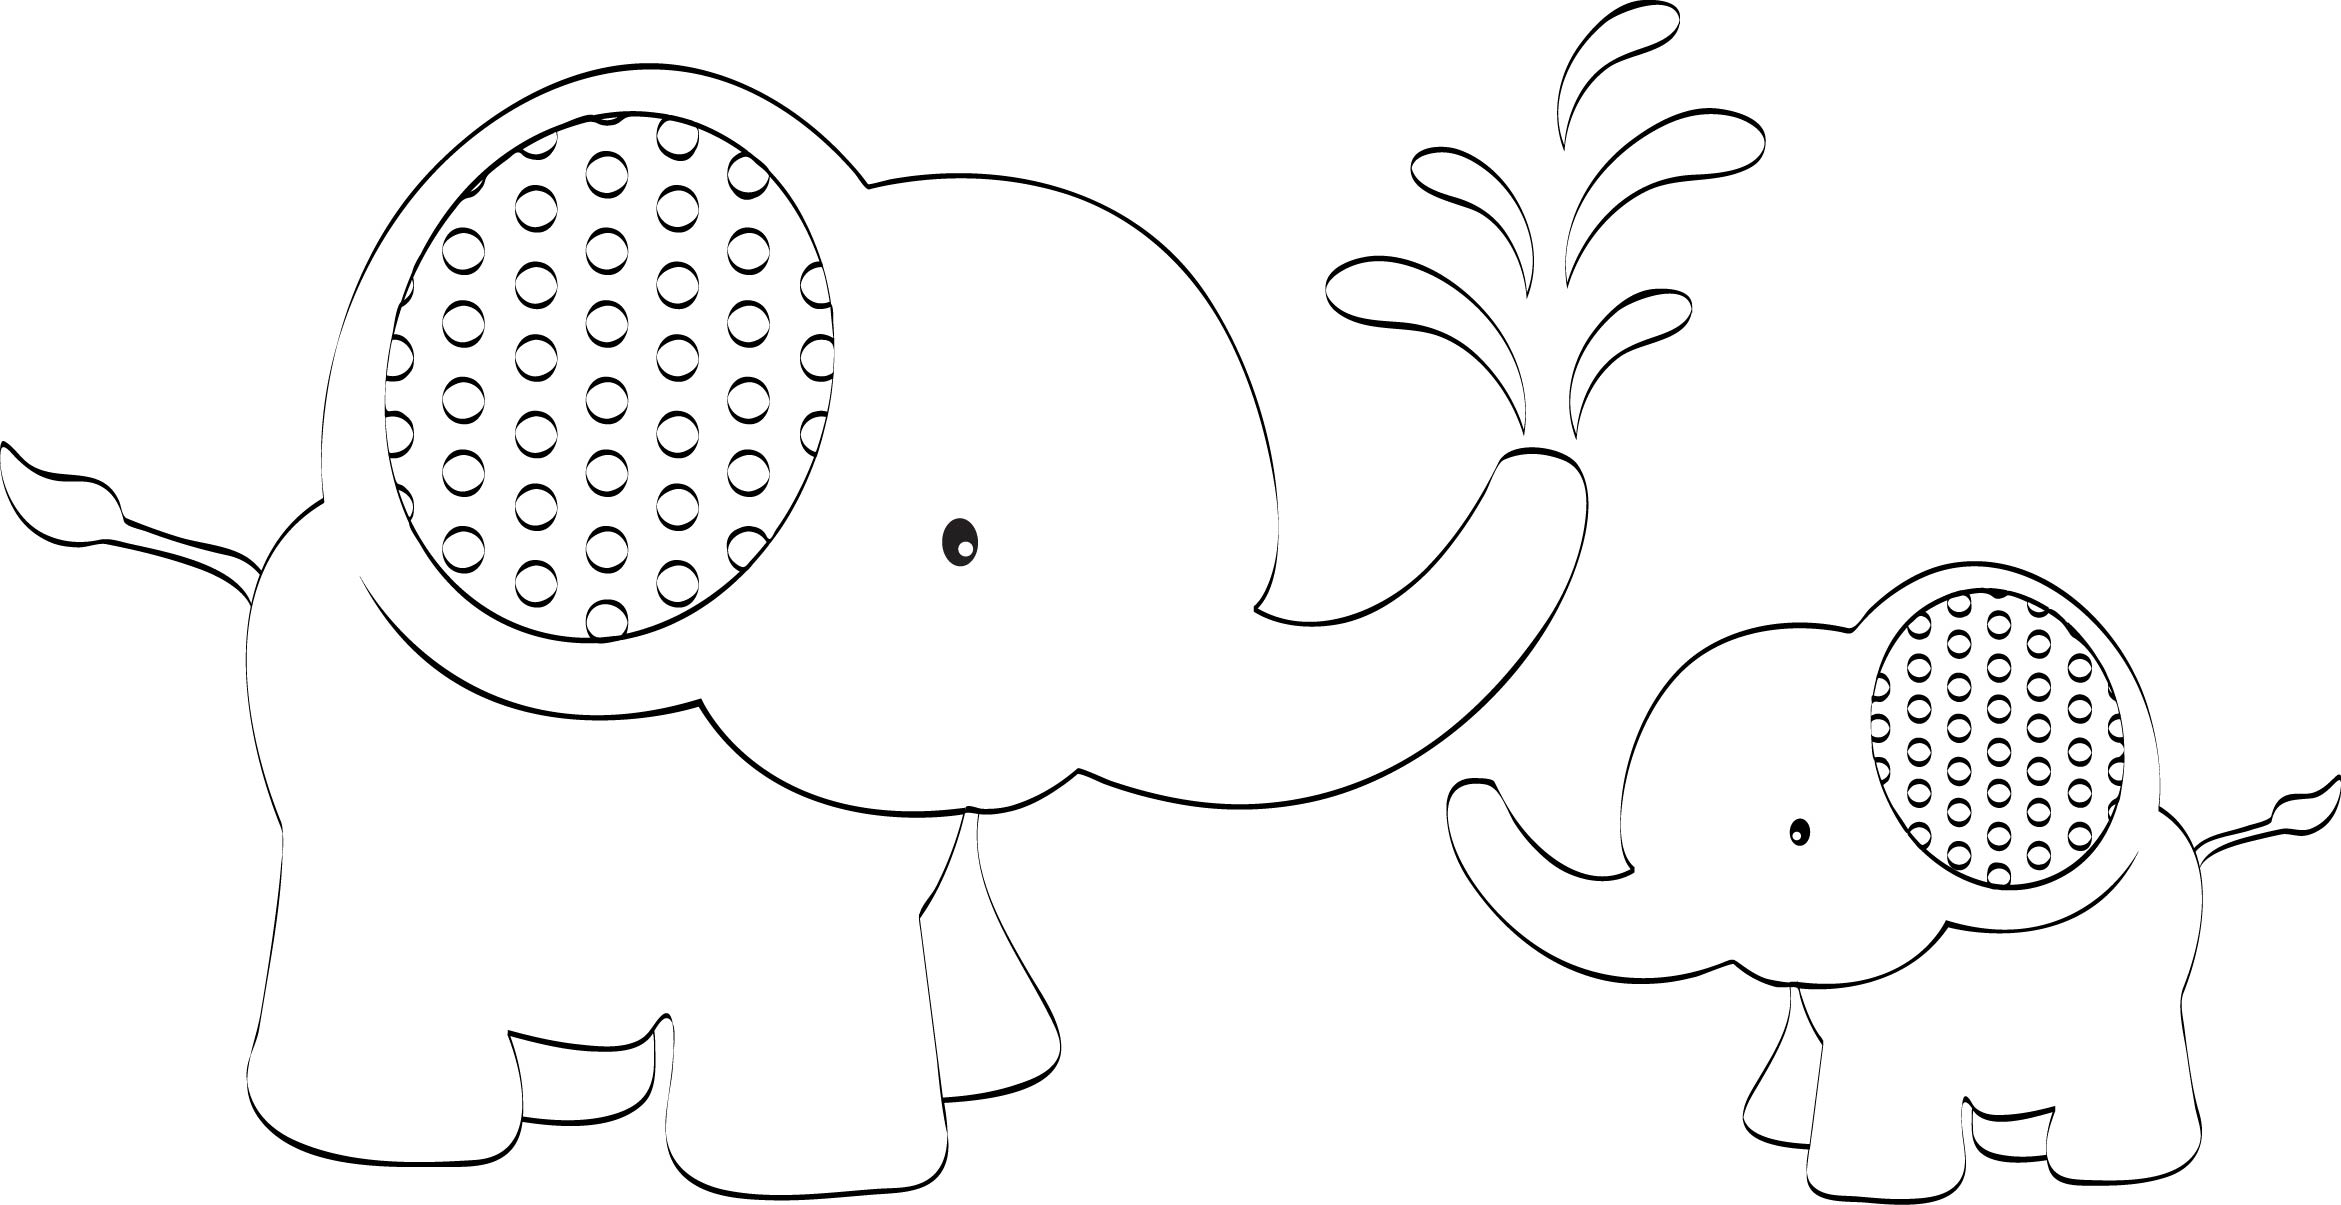 6 Best Images of Elephant Outline Printable Elephant Outline